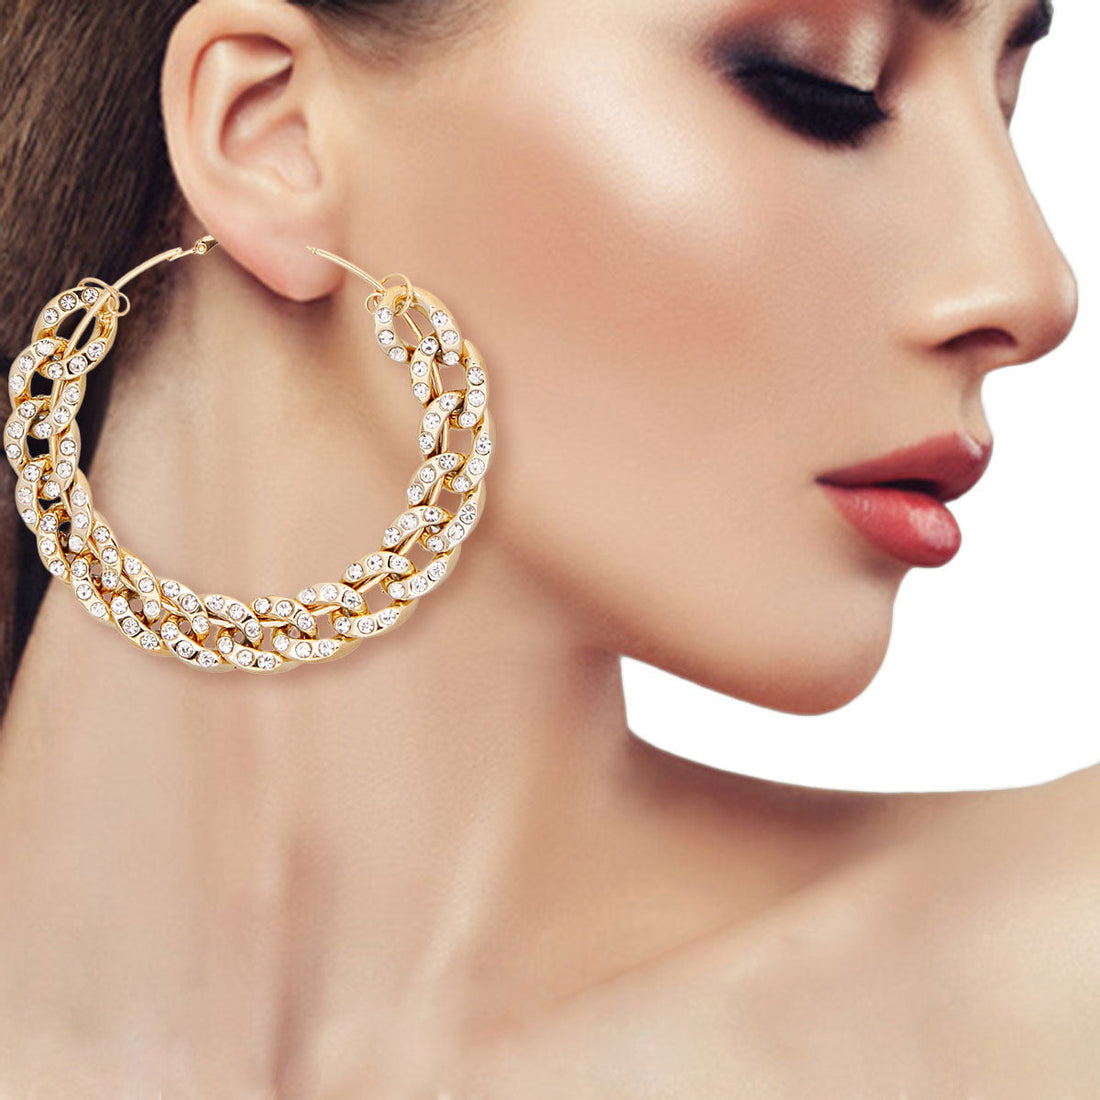 2.75 inch Gold Pave Stone Hoops